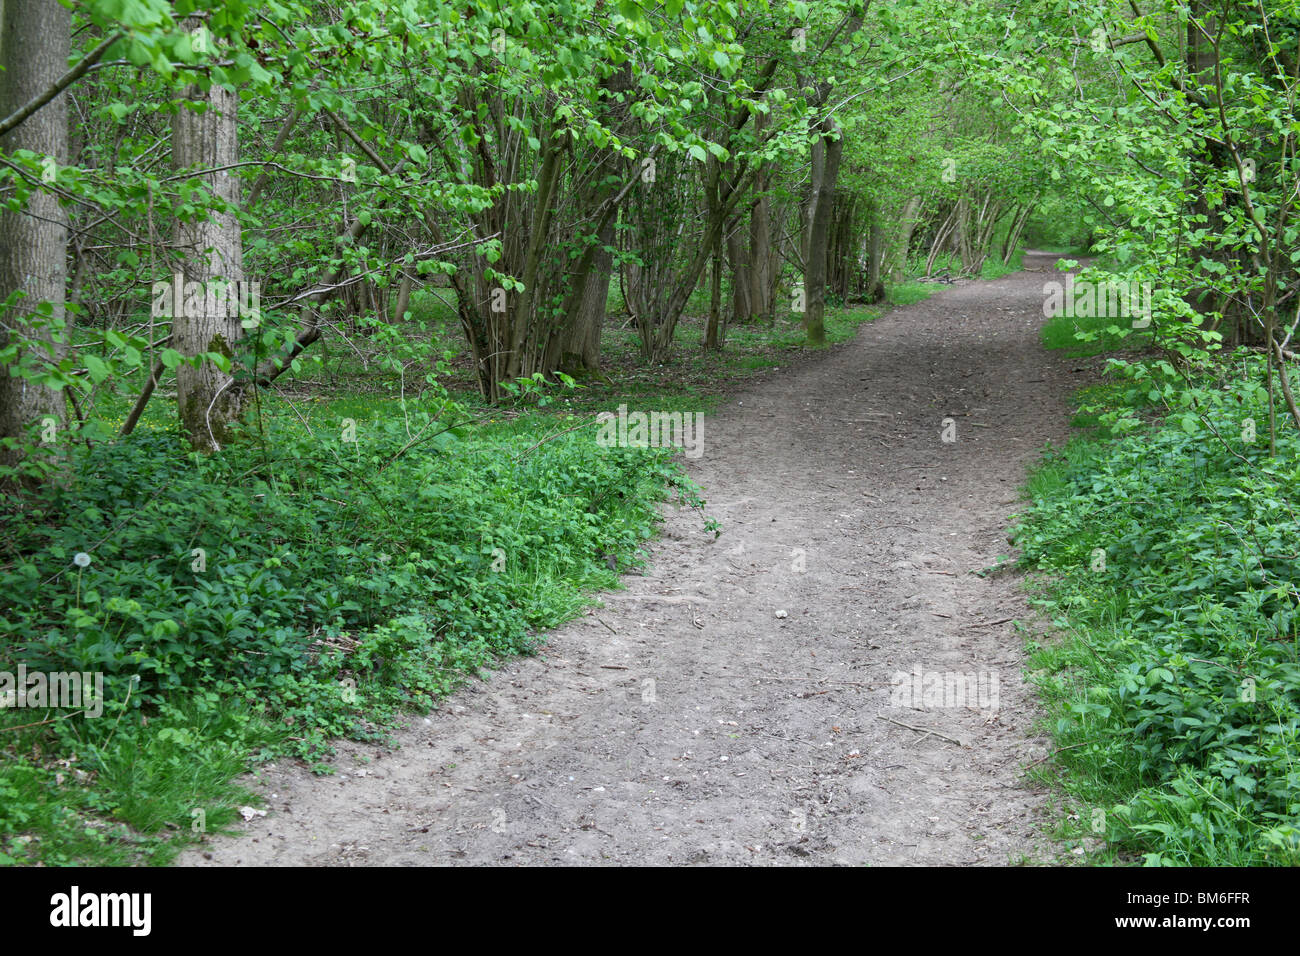 Woodland path or trail in spring, Hampshire, England. Stock Photo